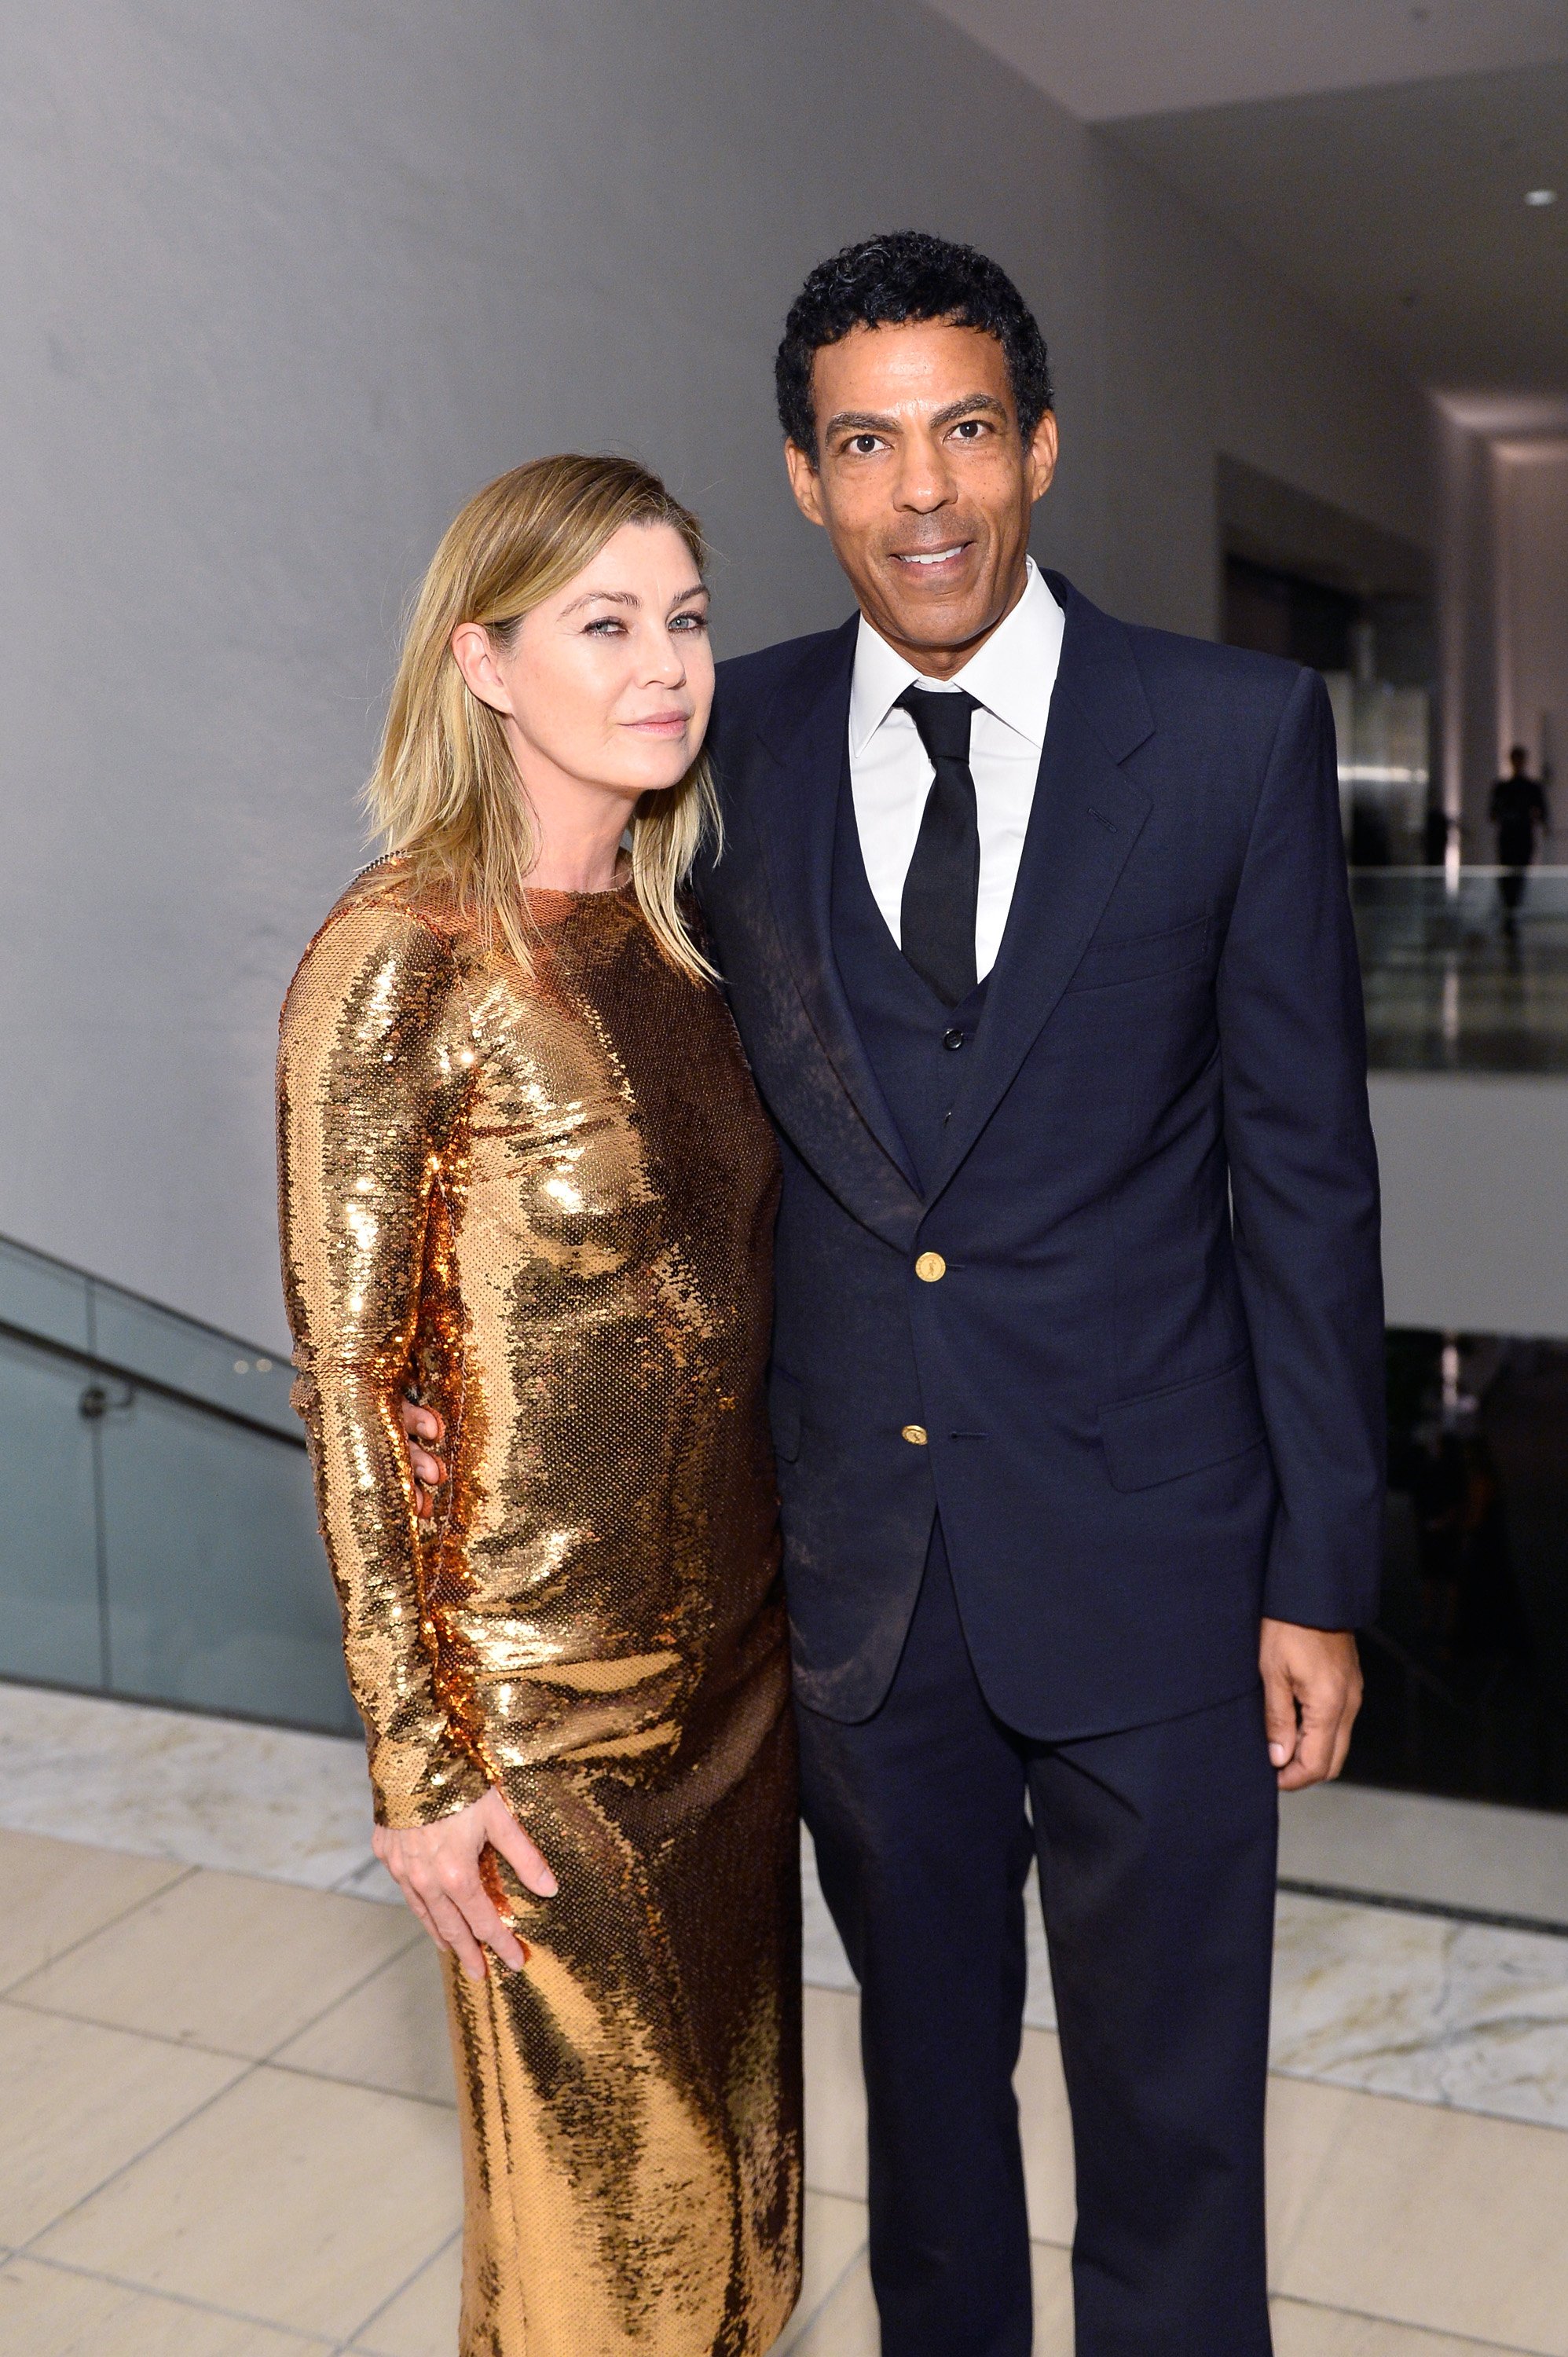 Ellen Pompeo and Chris Ivery at the Hammer Museum 15th Annual Gala on October 14, 2017, in Los Angeles, California. Source: Getty Images.